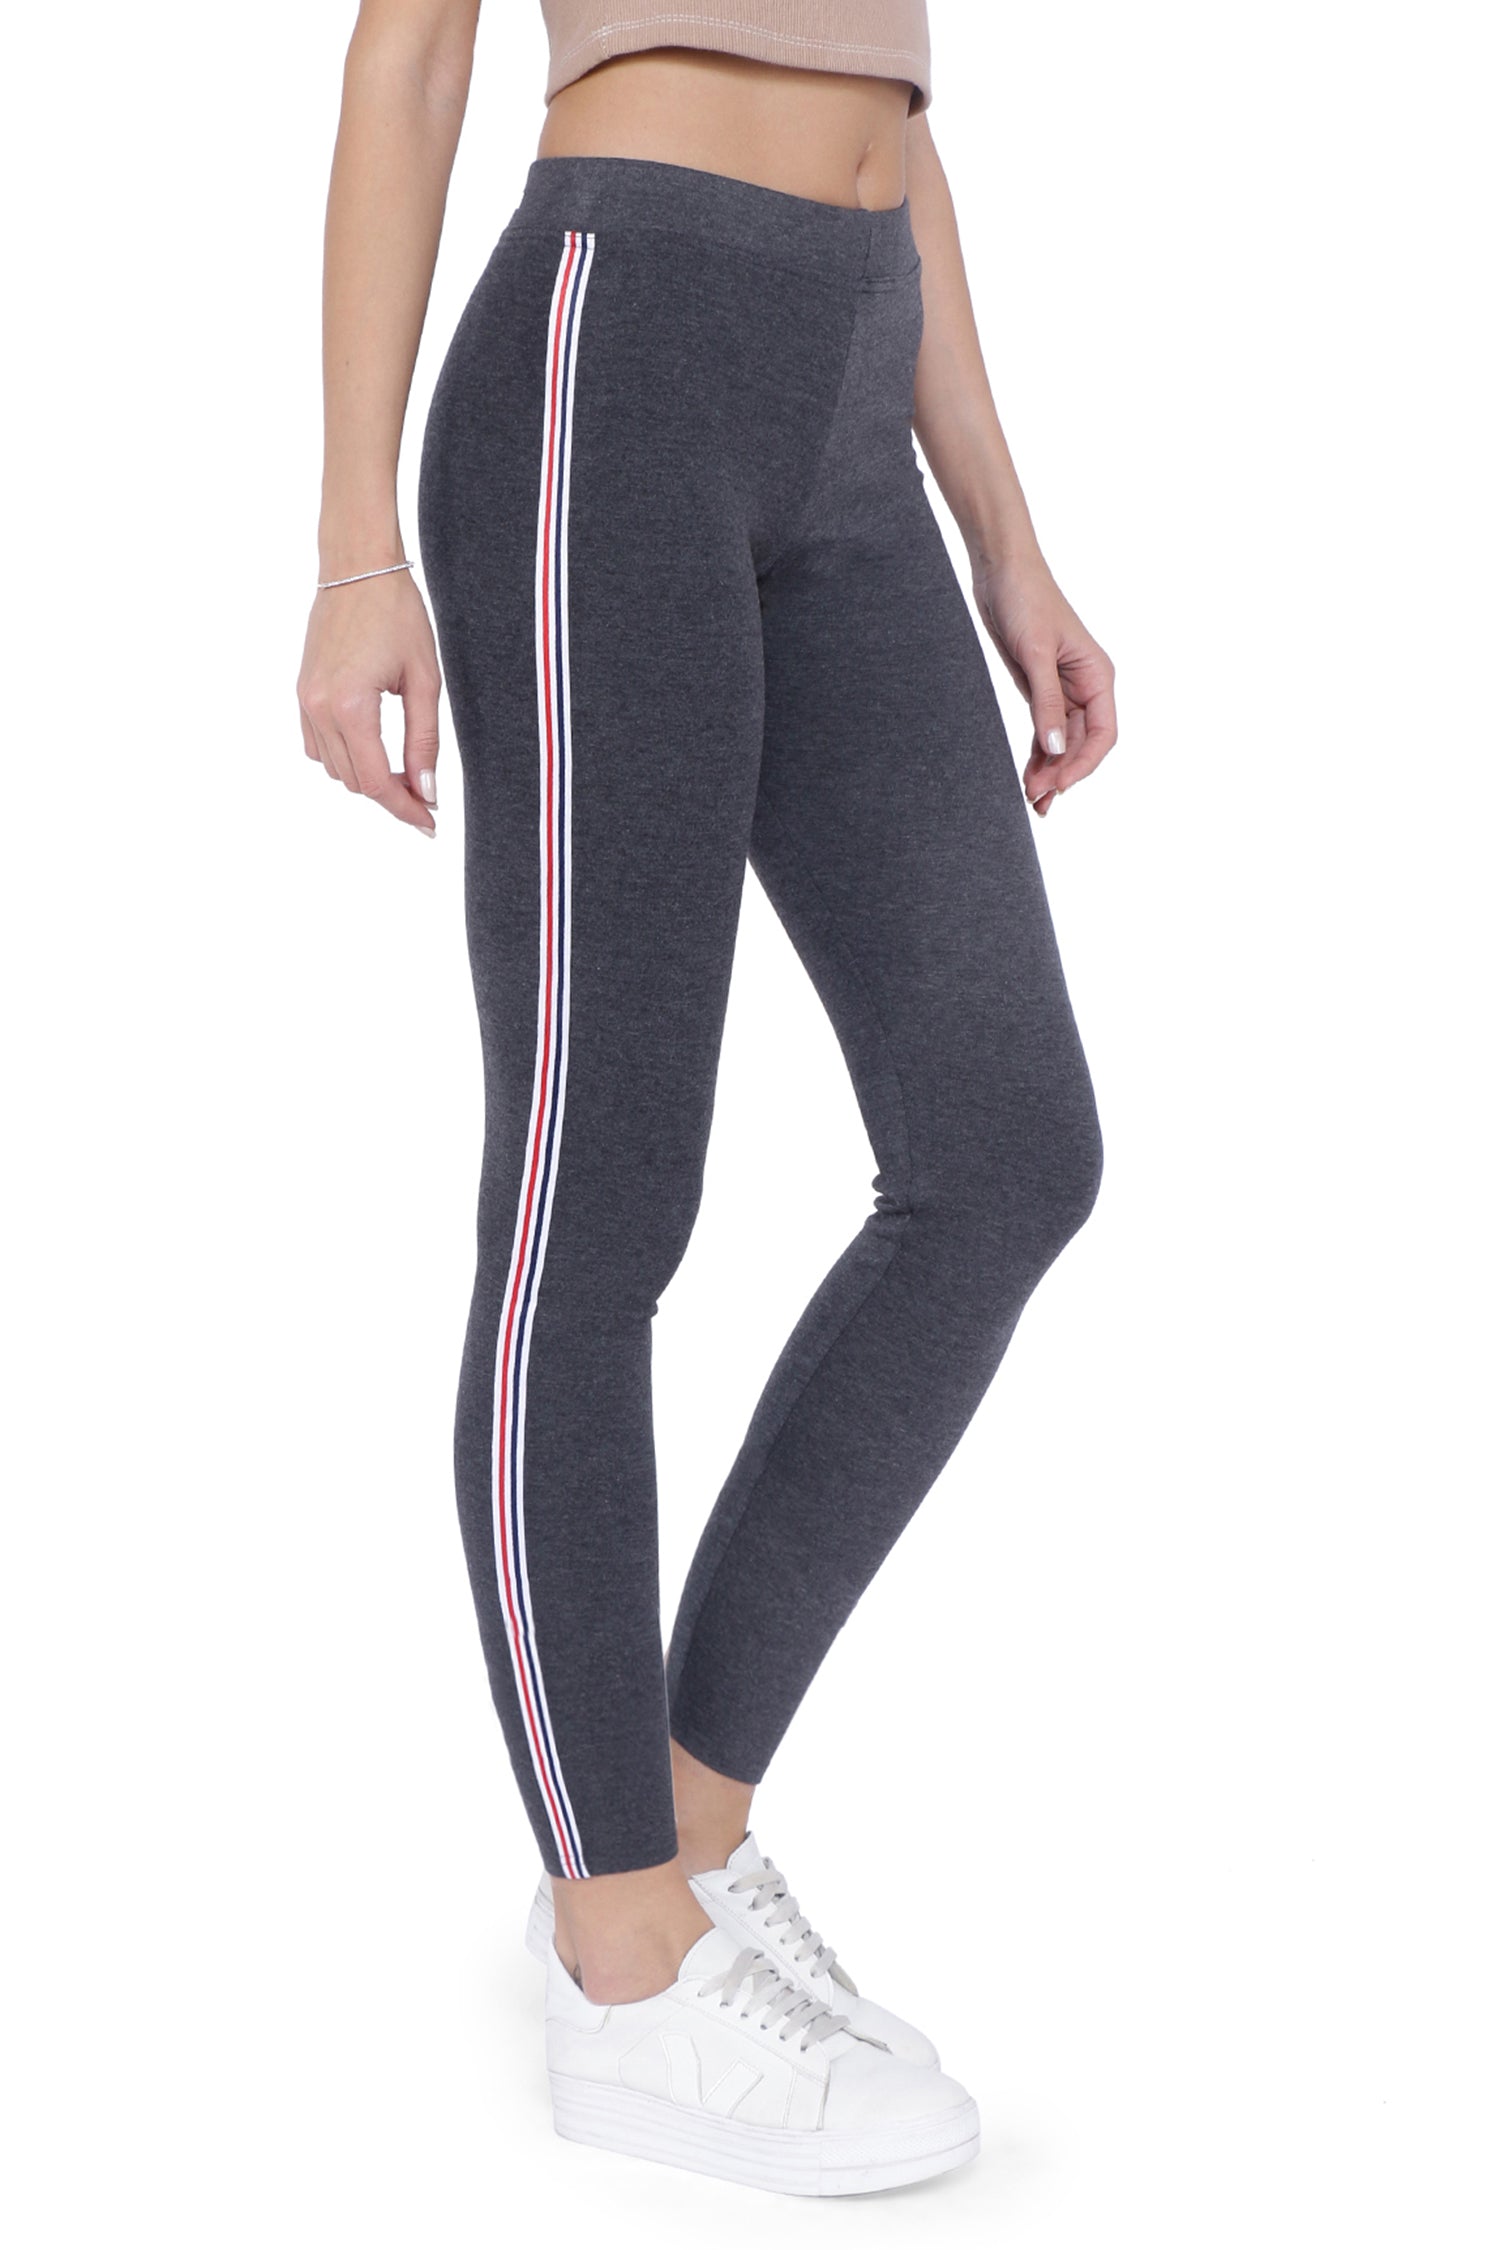 TRASA Women's and Girl's Skinny Fit Yoga Track pant - Grey Strip